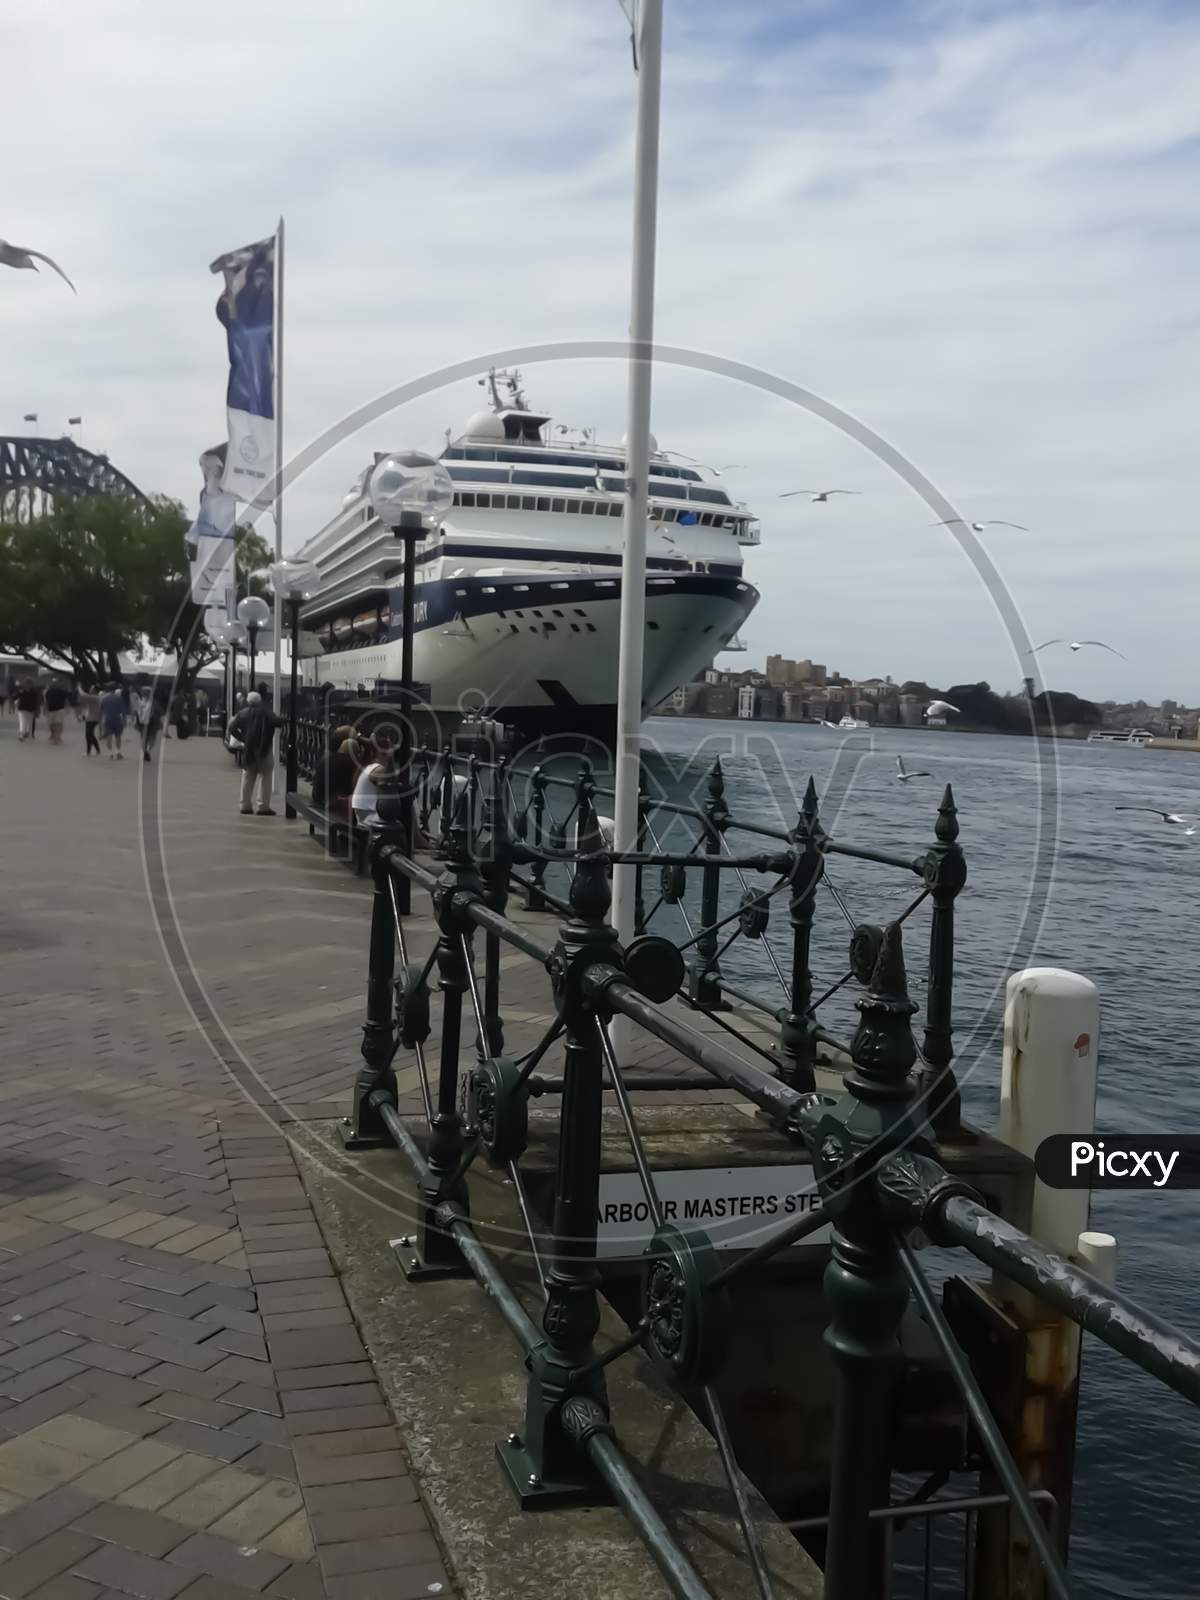 Sydney Australia ,10/10/2014 , Sydney Port , Large Passenger Ship Docked In The Pier And Seagulls Are Flying All Over